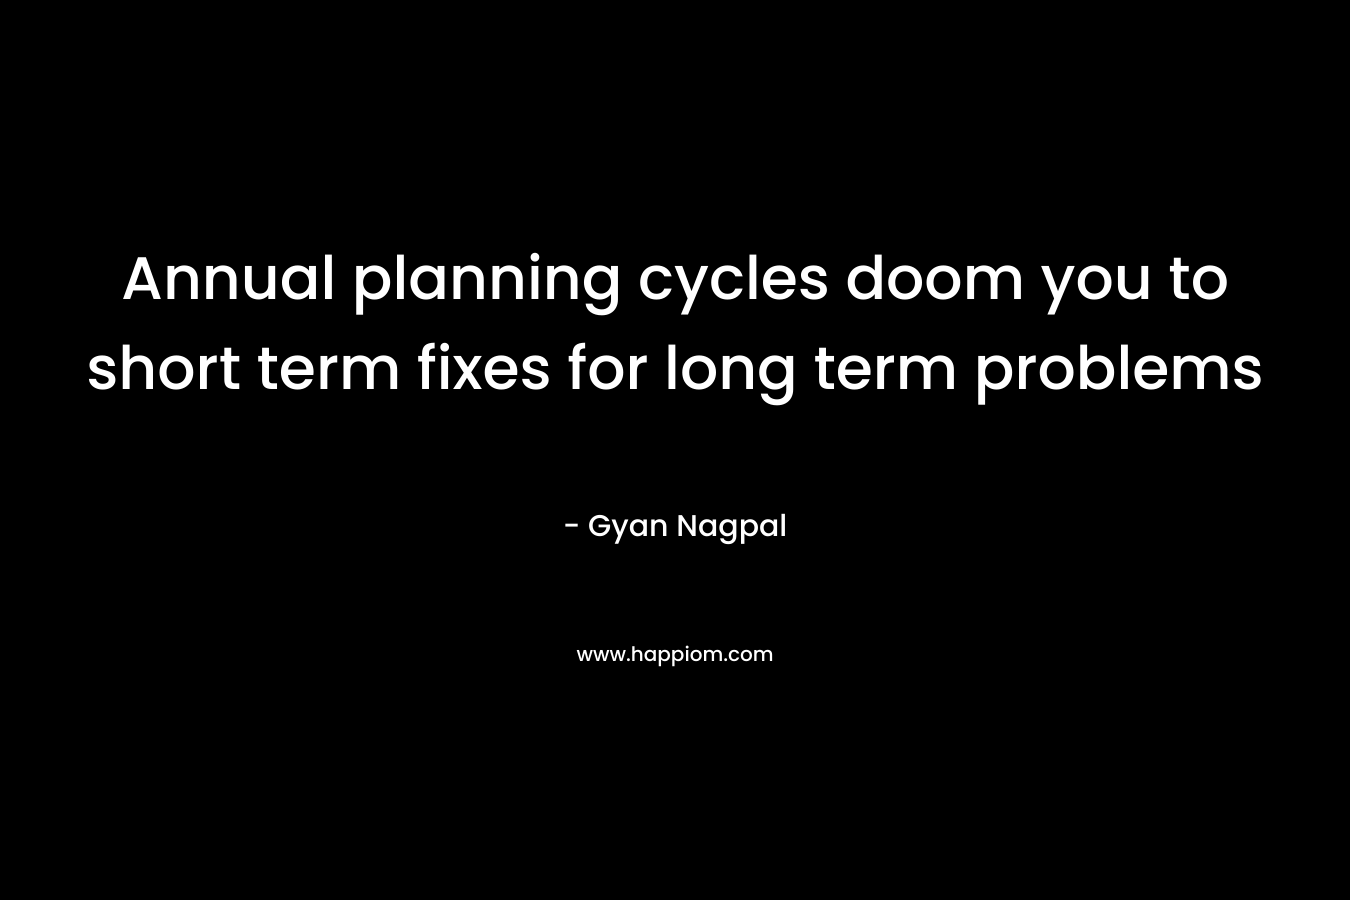 Annual planning cycles doom you to short term fixes for long term problems – Gyan Nagpal